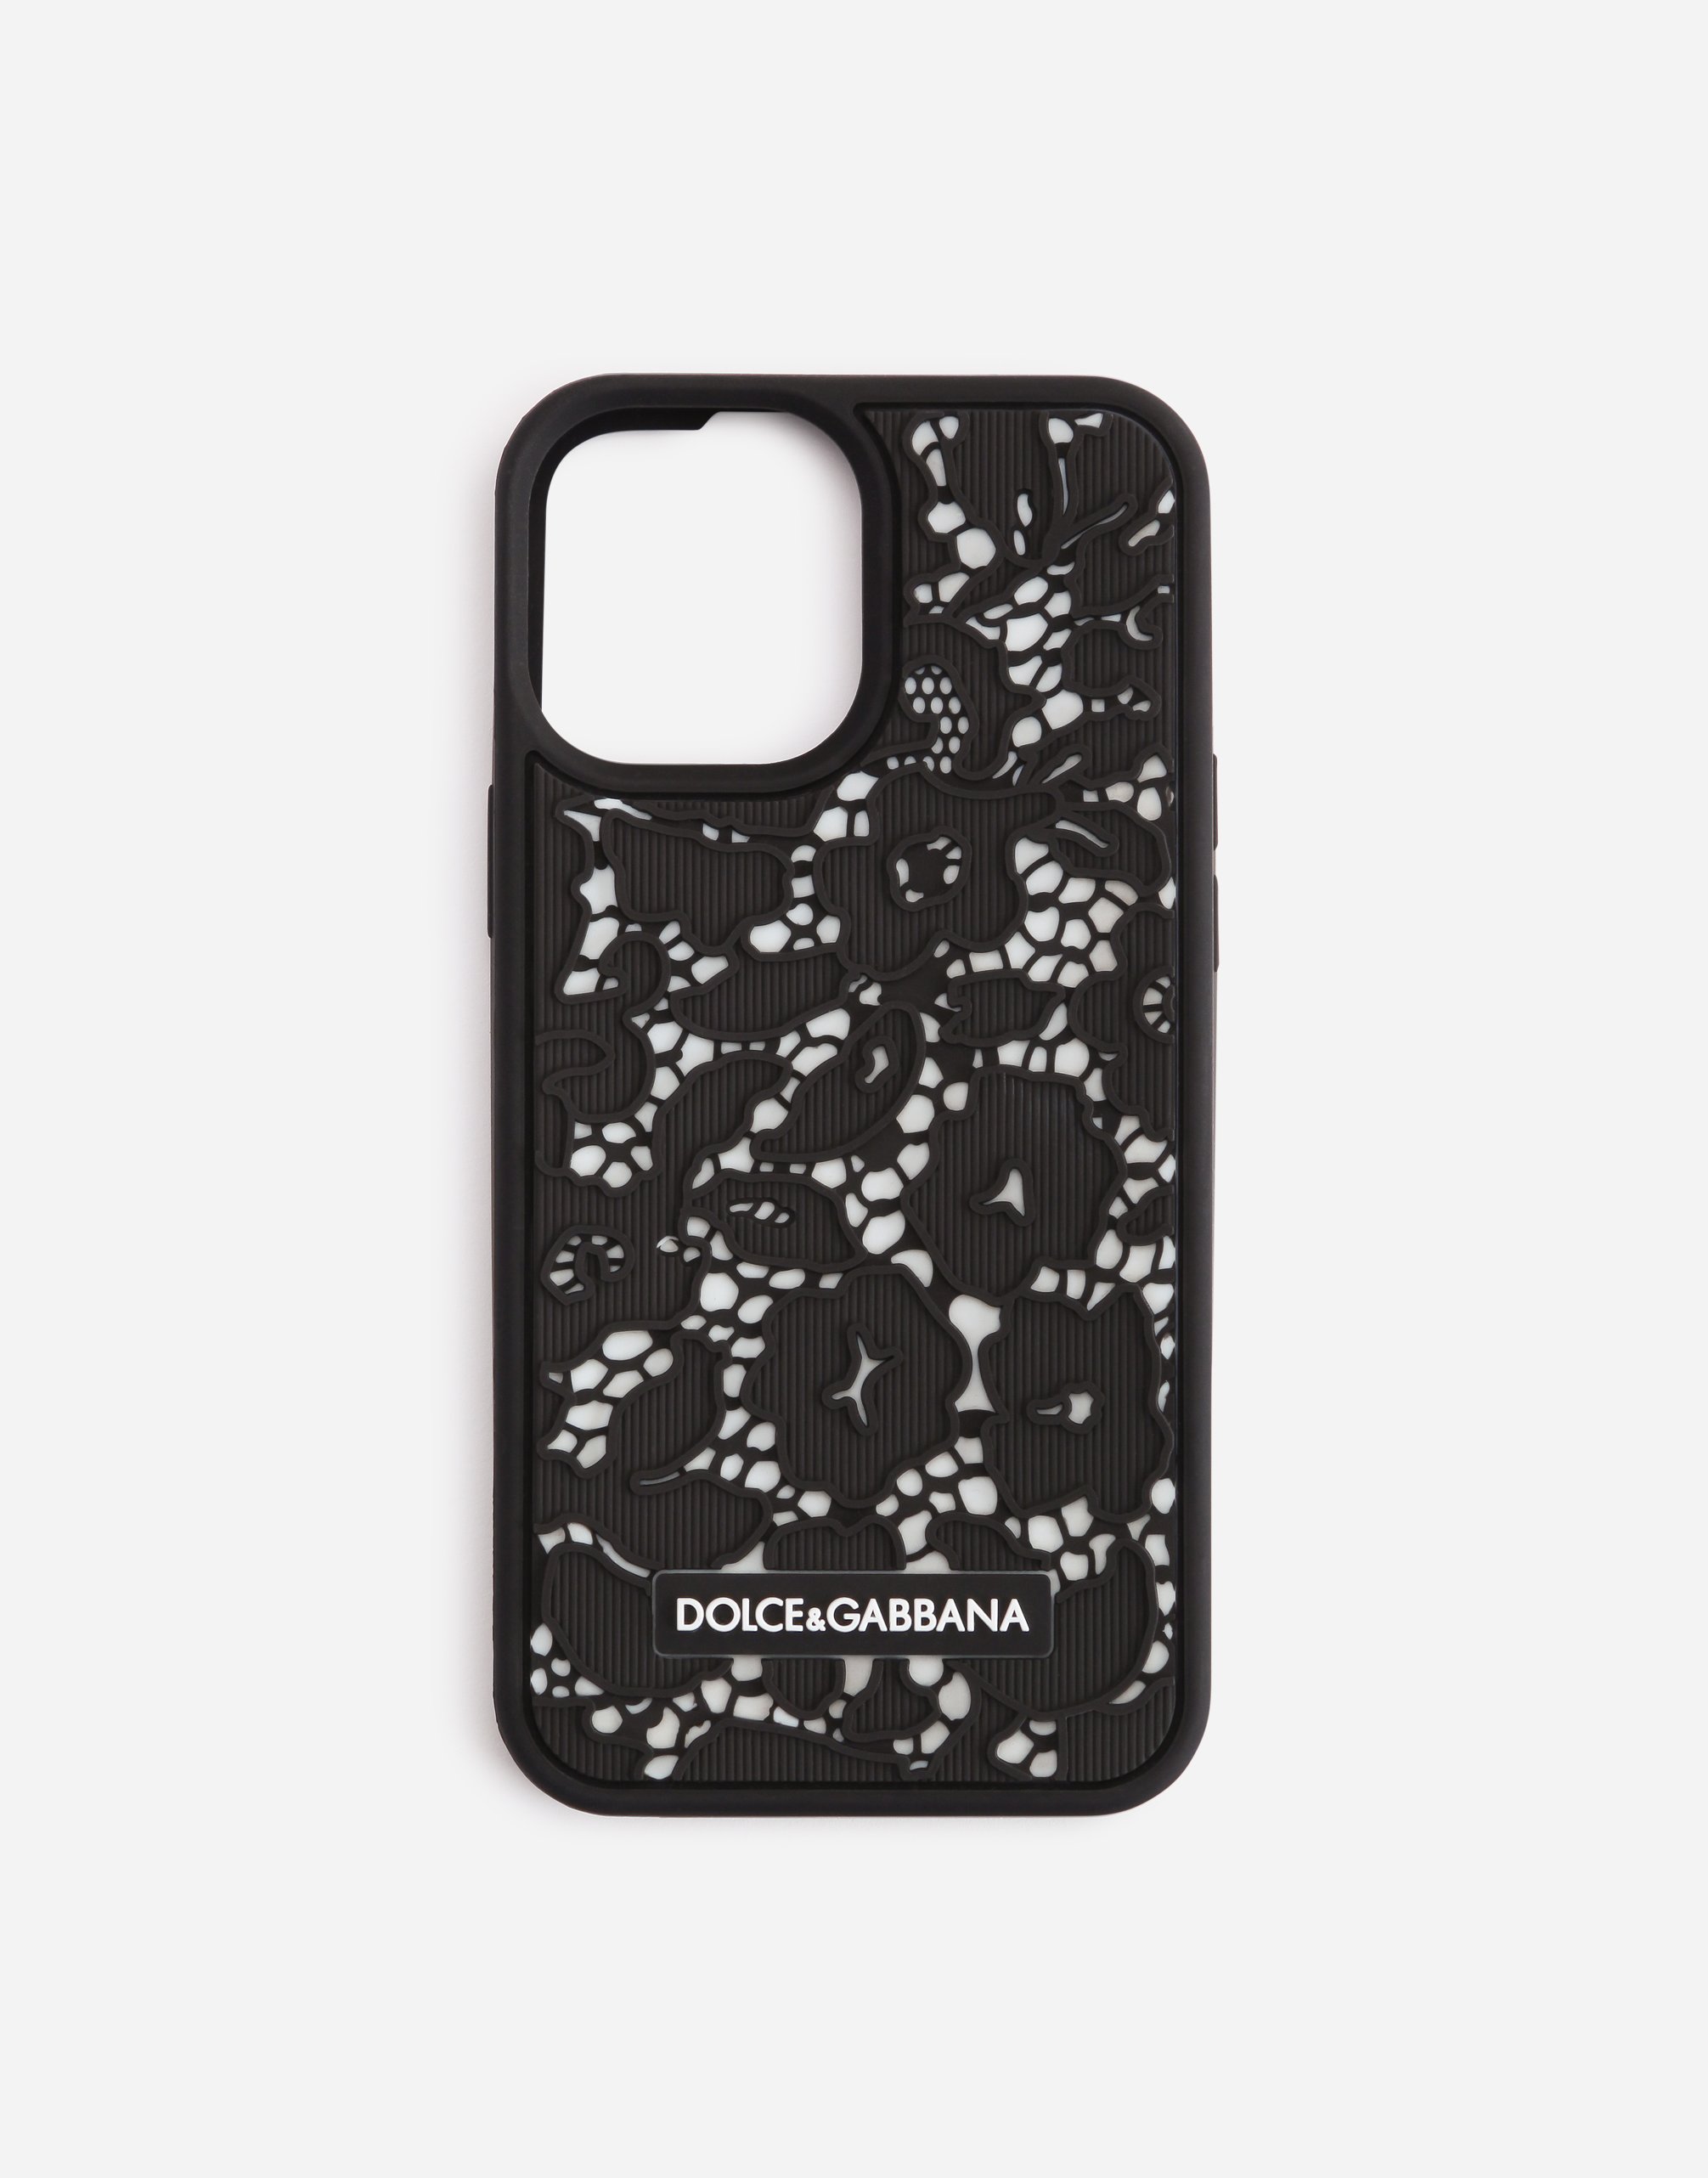 Dolce & Gabbana Lace Rubber Iphone 12 Pro Max Cover